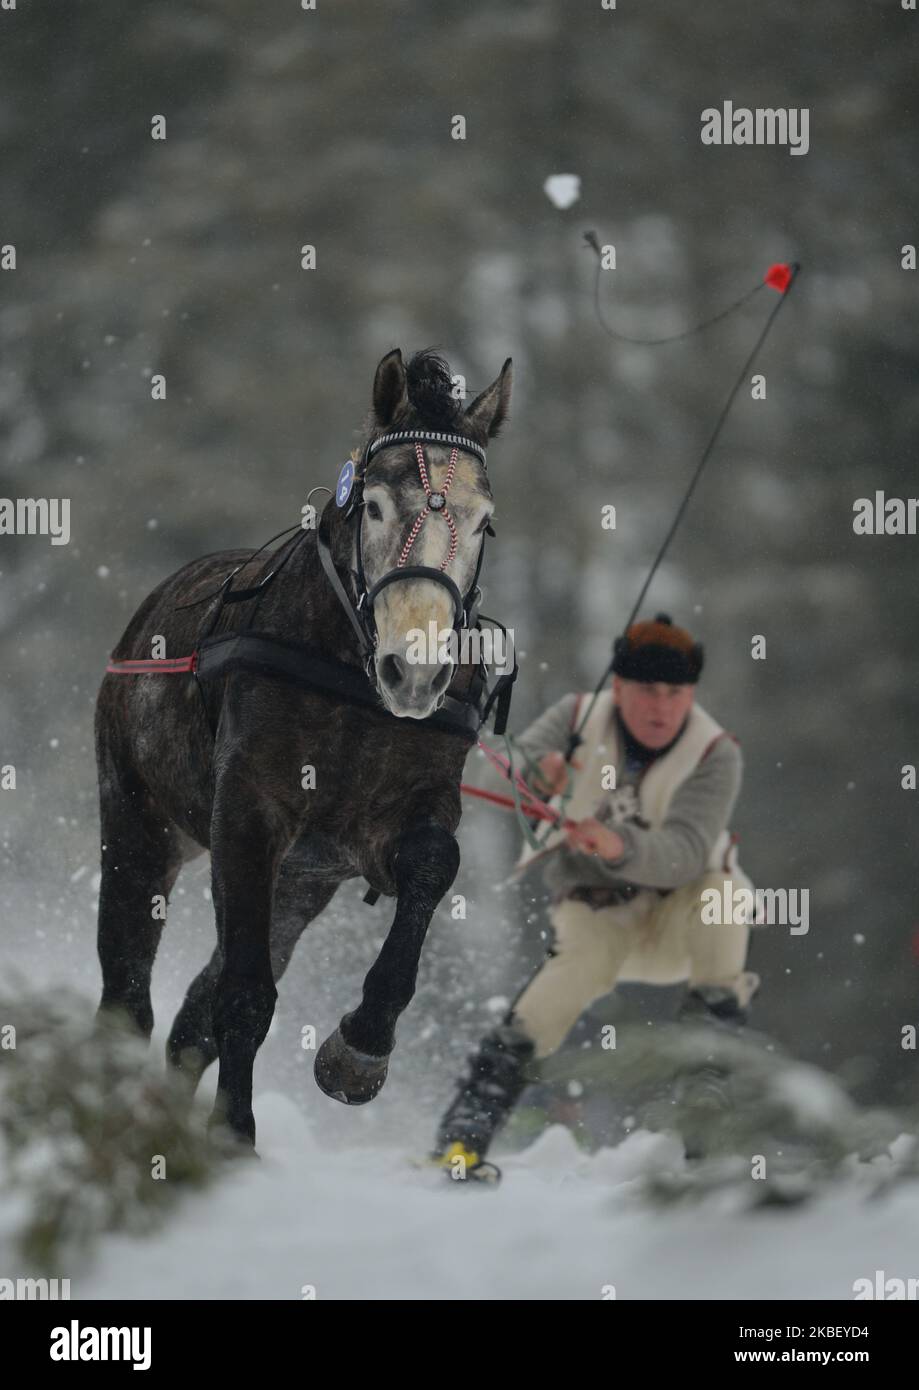 Daniel Gasienica skiing behind 'Szafir', in category skiring (skier behind a horse without rider), during the 2020 Edition of Kumoterki in Poronin Kumoterki. On Sunday, January 19, 2019, in Male Ciche Lichajowki, Poronin, Poland. (Photo by Artur Widak/NurPhoto) Stock Photo